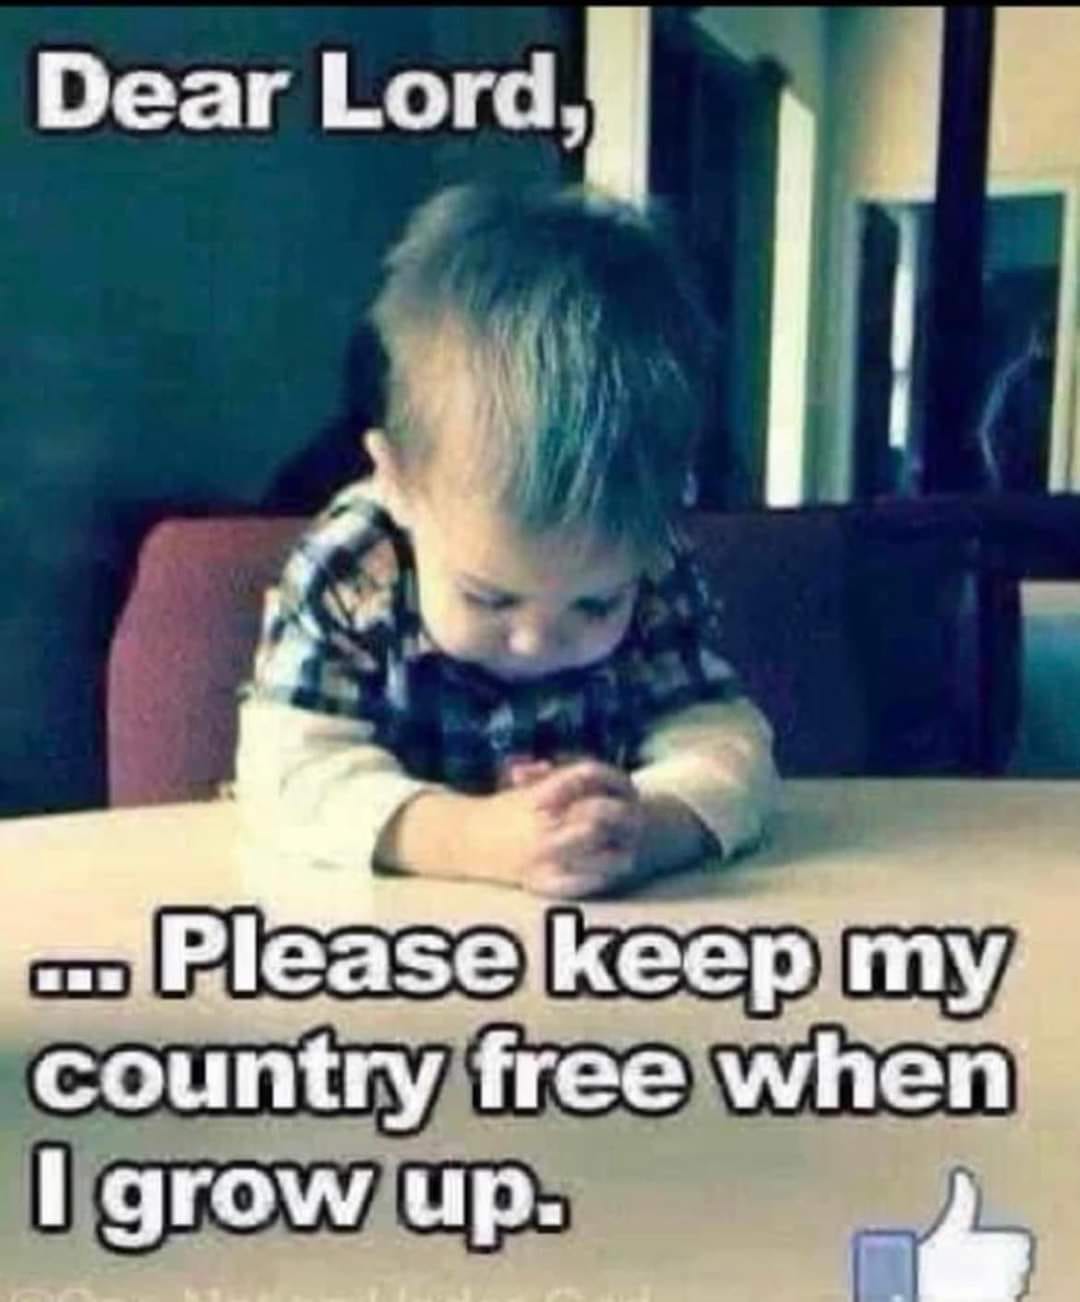 May be an image of 1 person and text that says 'Dear Lord, -...Please keep my country free when I grow up.'